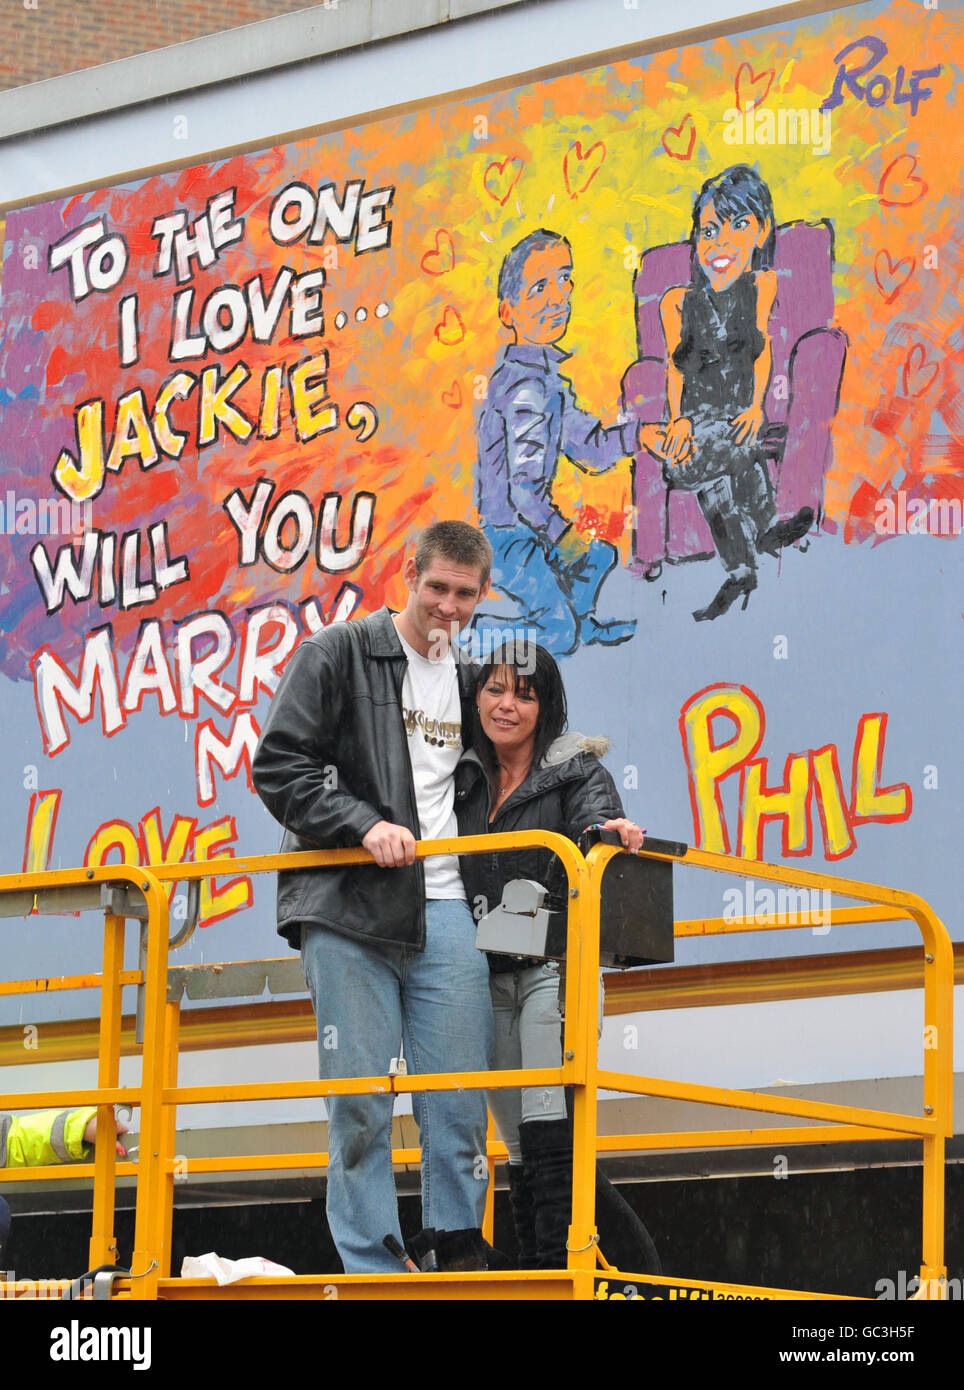 Phil Lee, from Suffolk, proposes to girlfriend Jackie Howarth with a billboard painted by Rolf Harris as part of a campaign by Cadbury's to promote Wispa Gold chocolate. Stock Photo